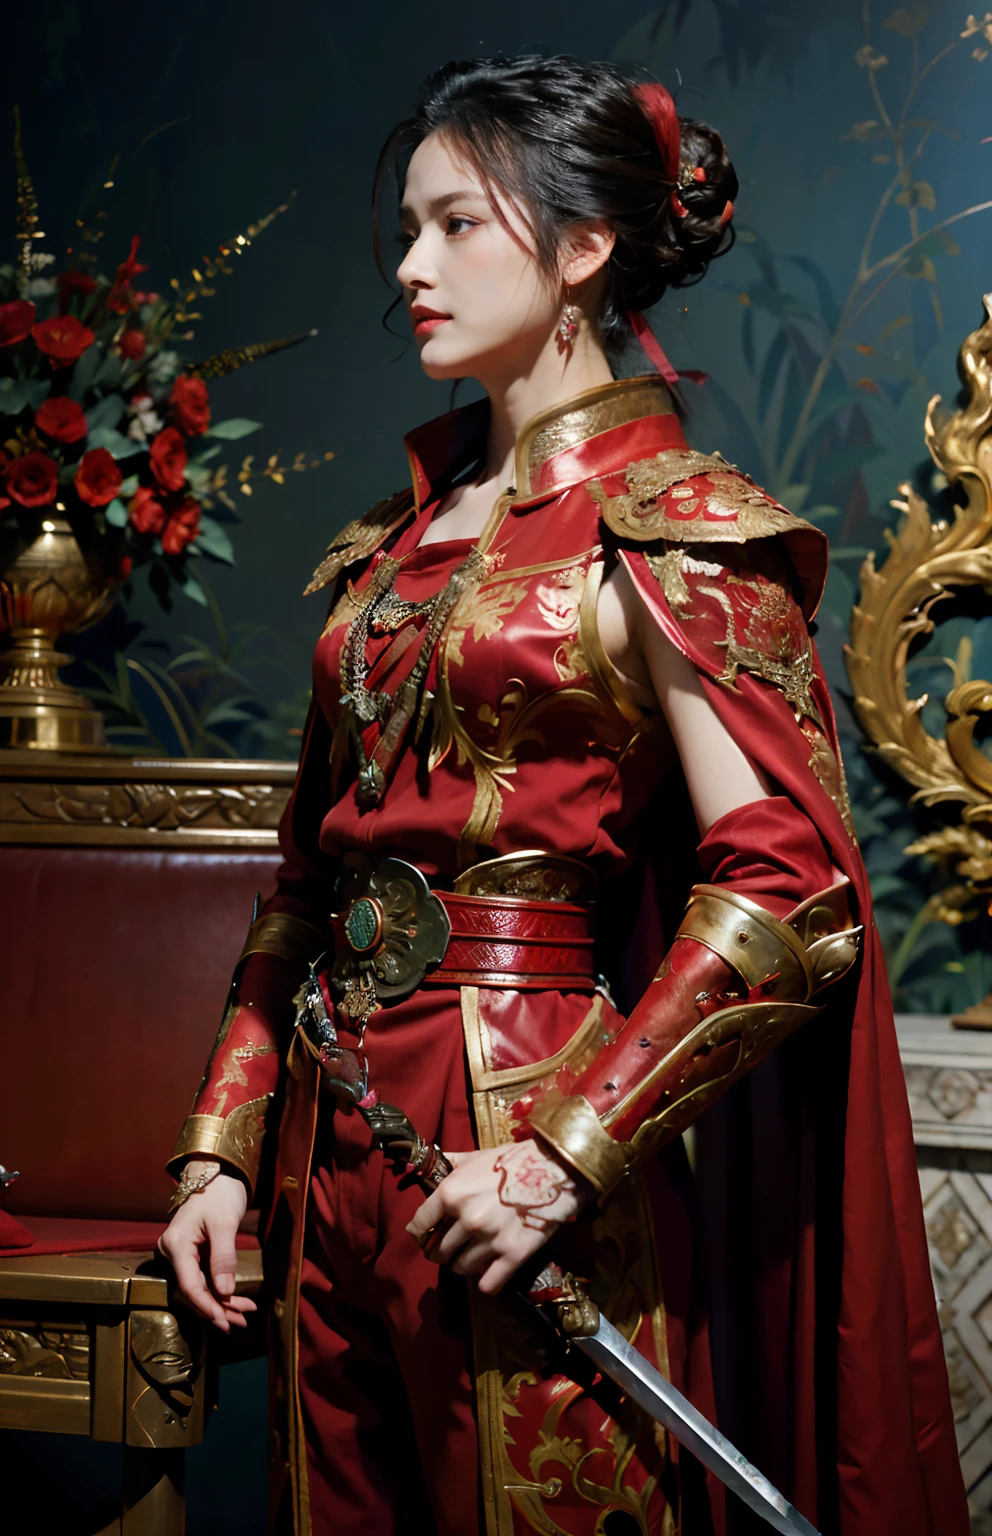 Looks serious., Lip press., (Updo Red:1.2), (Red Steel Armor:1.1) And a robe.. (capes:1.2) Royal style family (embroidery:0.5) With a sword.., skinny (Gorket Luckcart Poldron :1.3), Falcon symbol on armor, (masterpiece:1.2) (illustration:1.1) (bestquality:1.2) (Detailed) (intricate) (10) (HDR) (wallpaper) (Cinematic lighting) (crisp focus), Linewichit Style